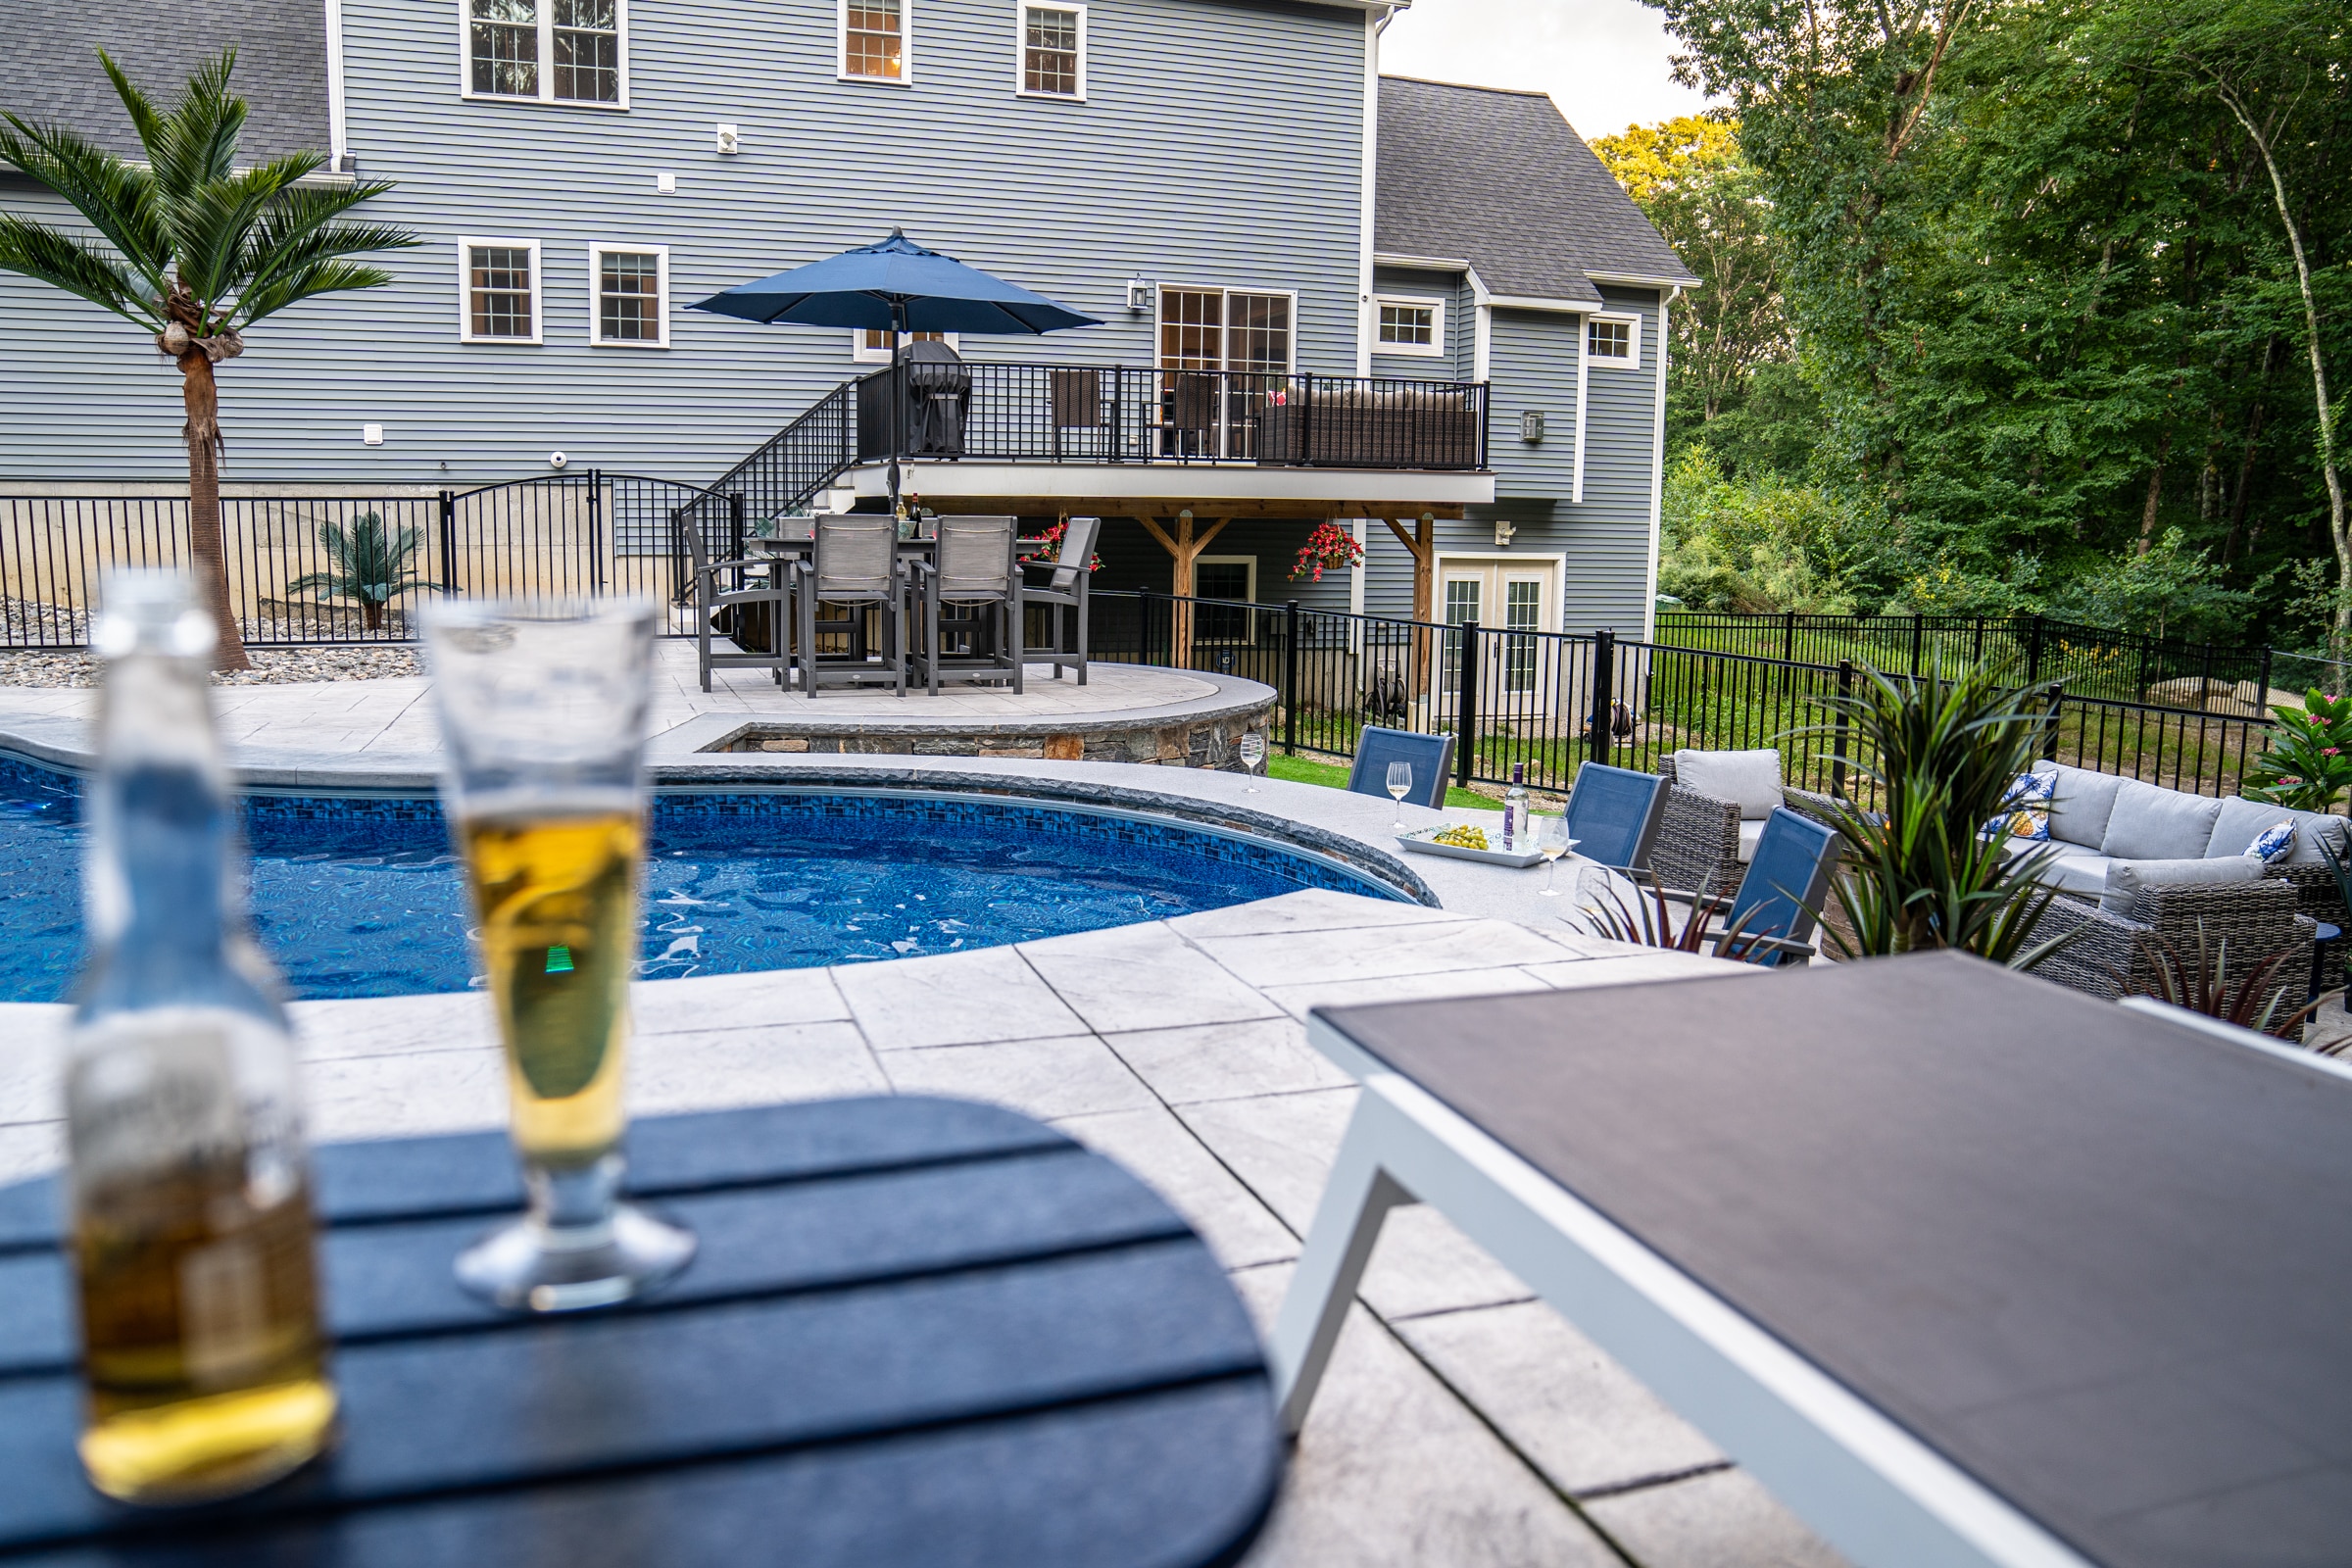 A view of the poolside bar from the sundeck at this Dex by Terra stamped concrete pool deck project in Northbridge, Massachusetts.